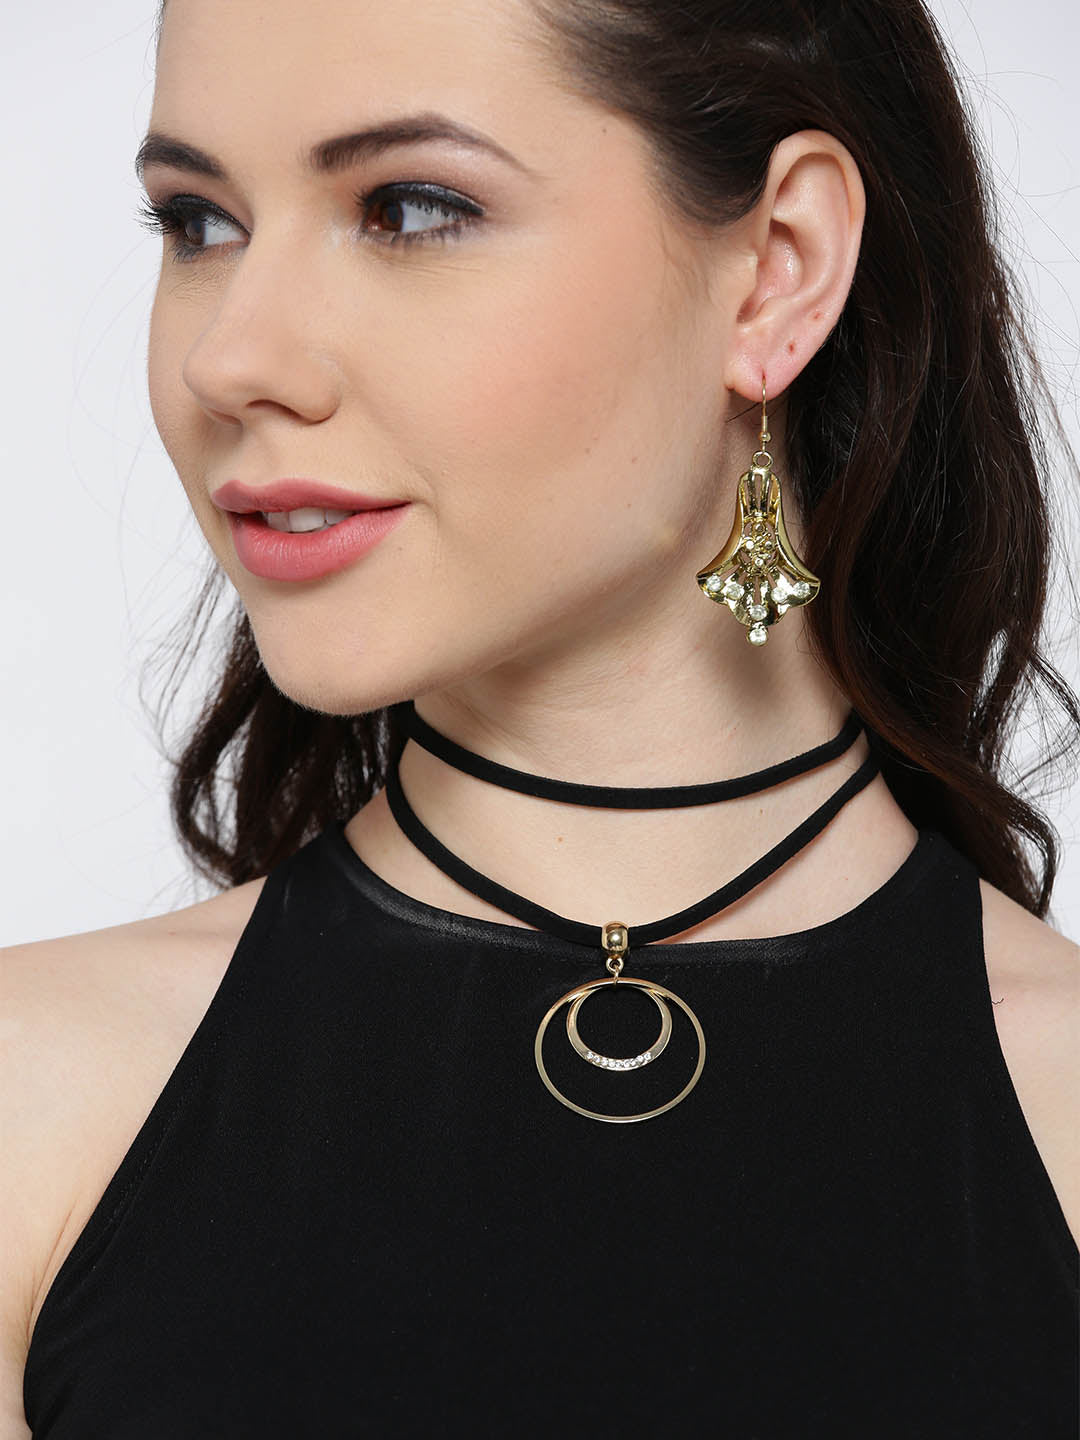 Black and gold toned choker and earrings set